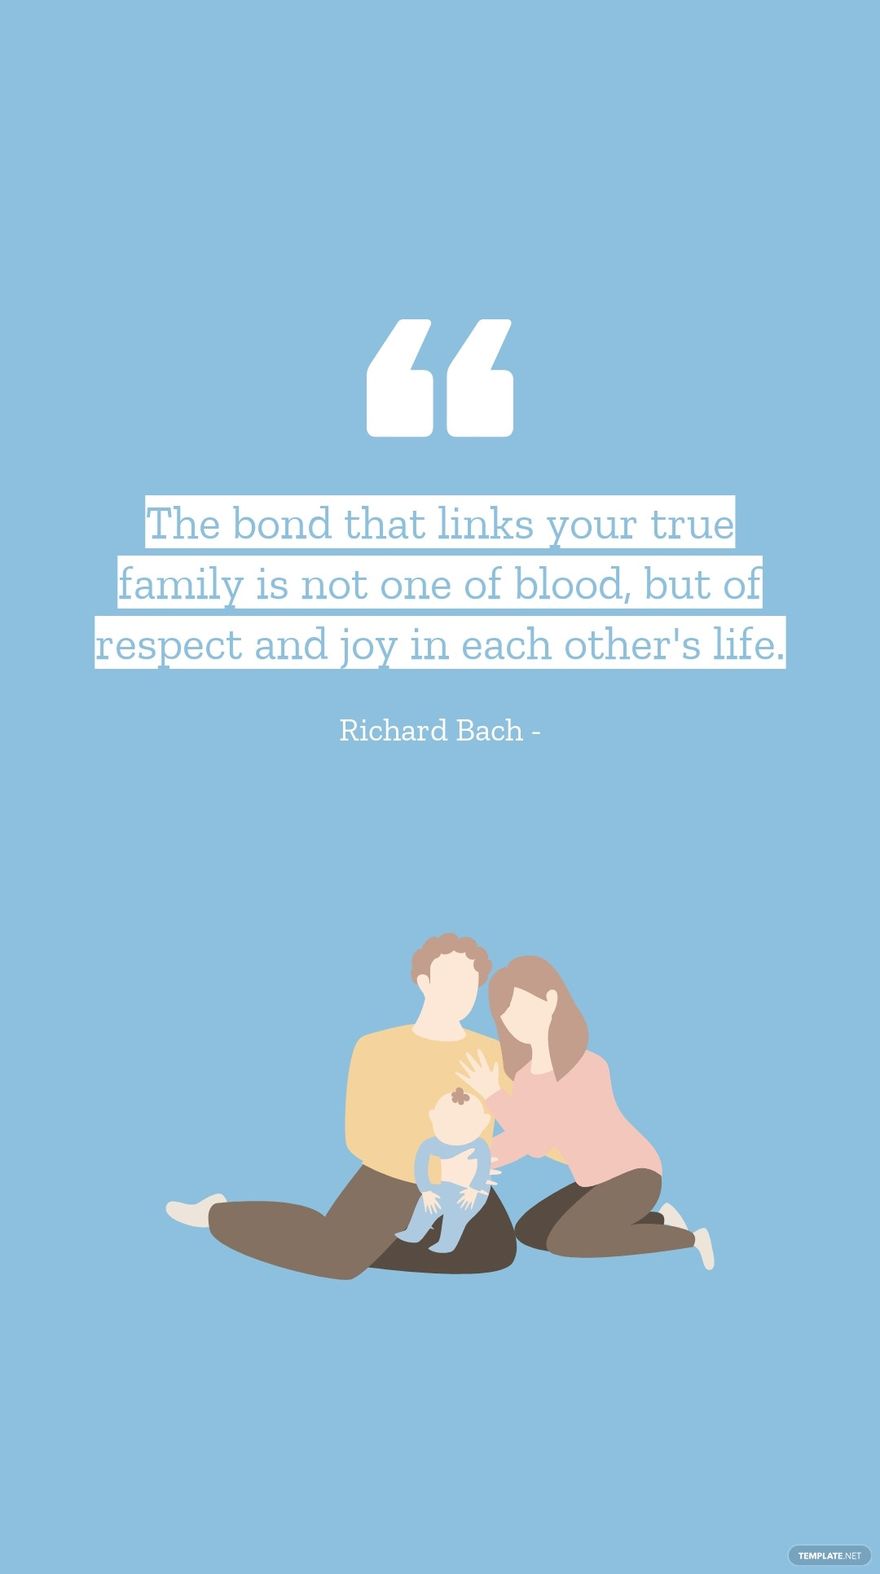 Richard Bach - The bond that links your true family is not one of blood, but of respect and joy in each other's life.